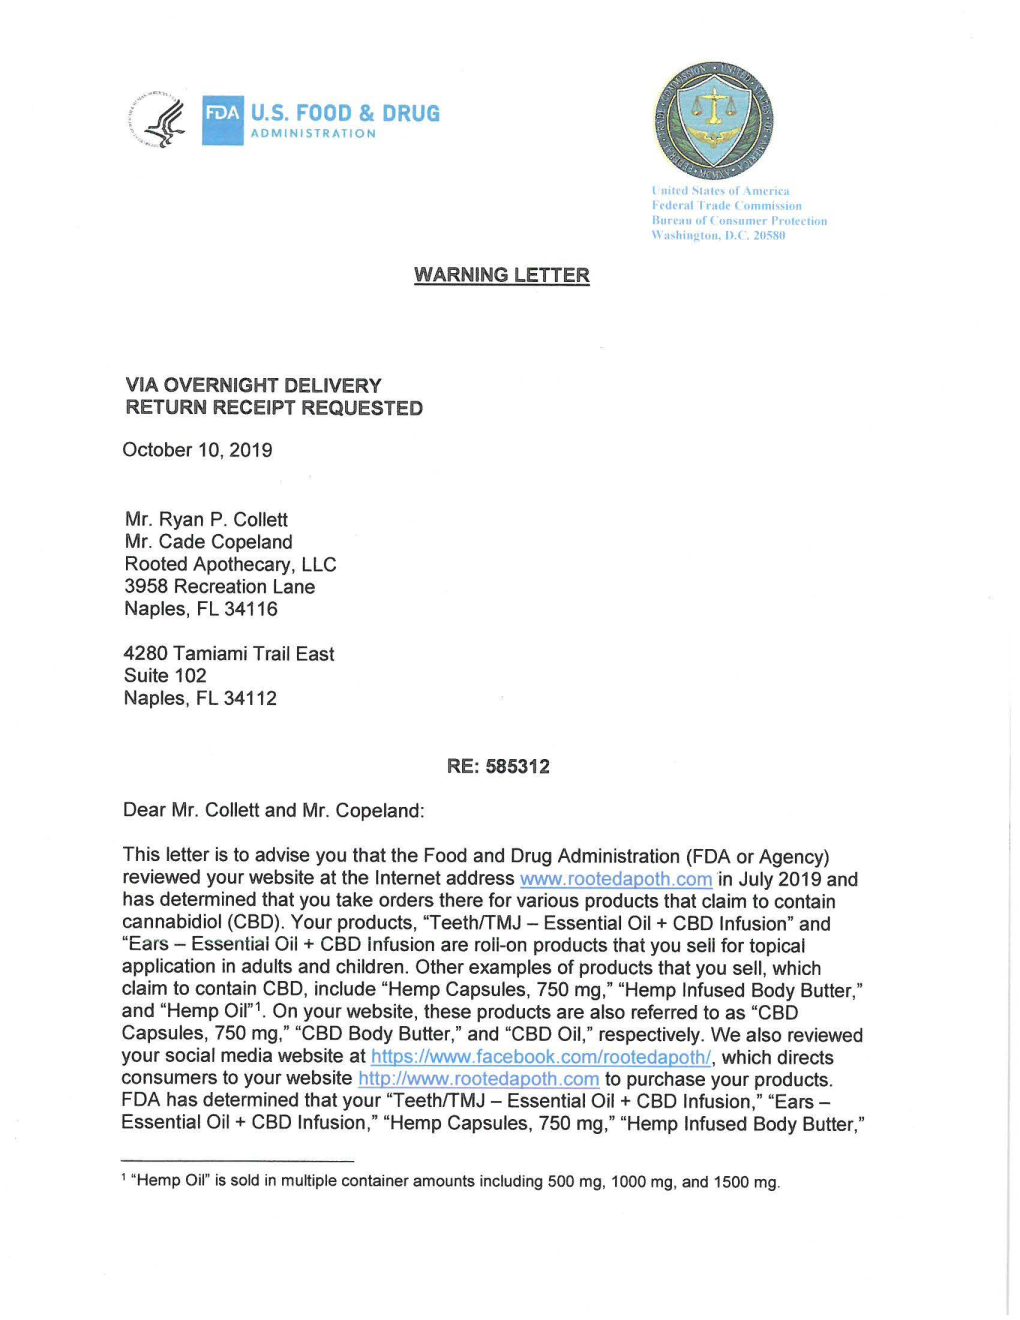 FTC and US FDA Warning Letter Re: Products Containing